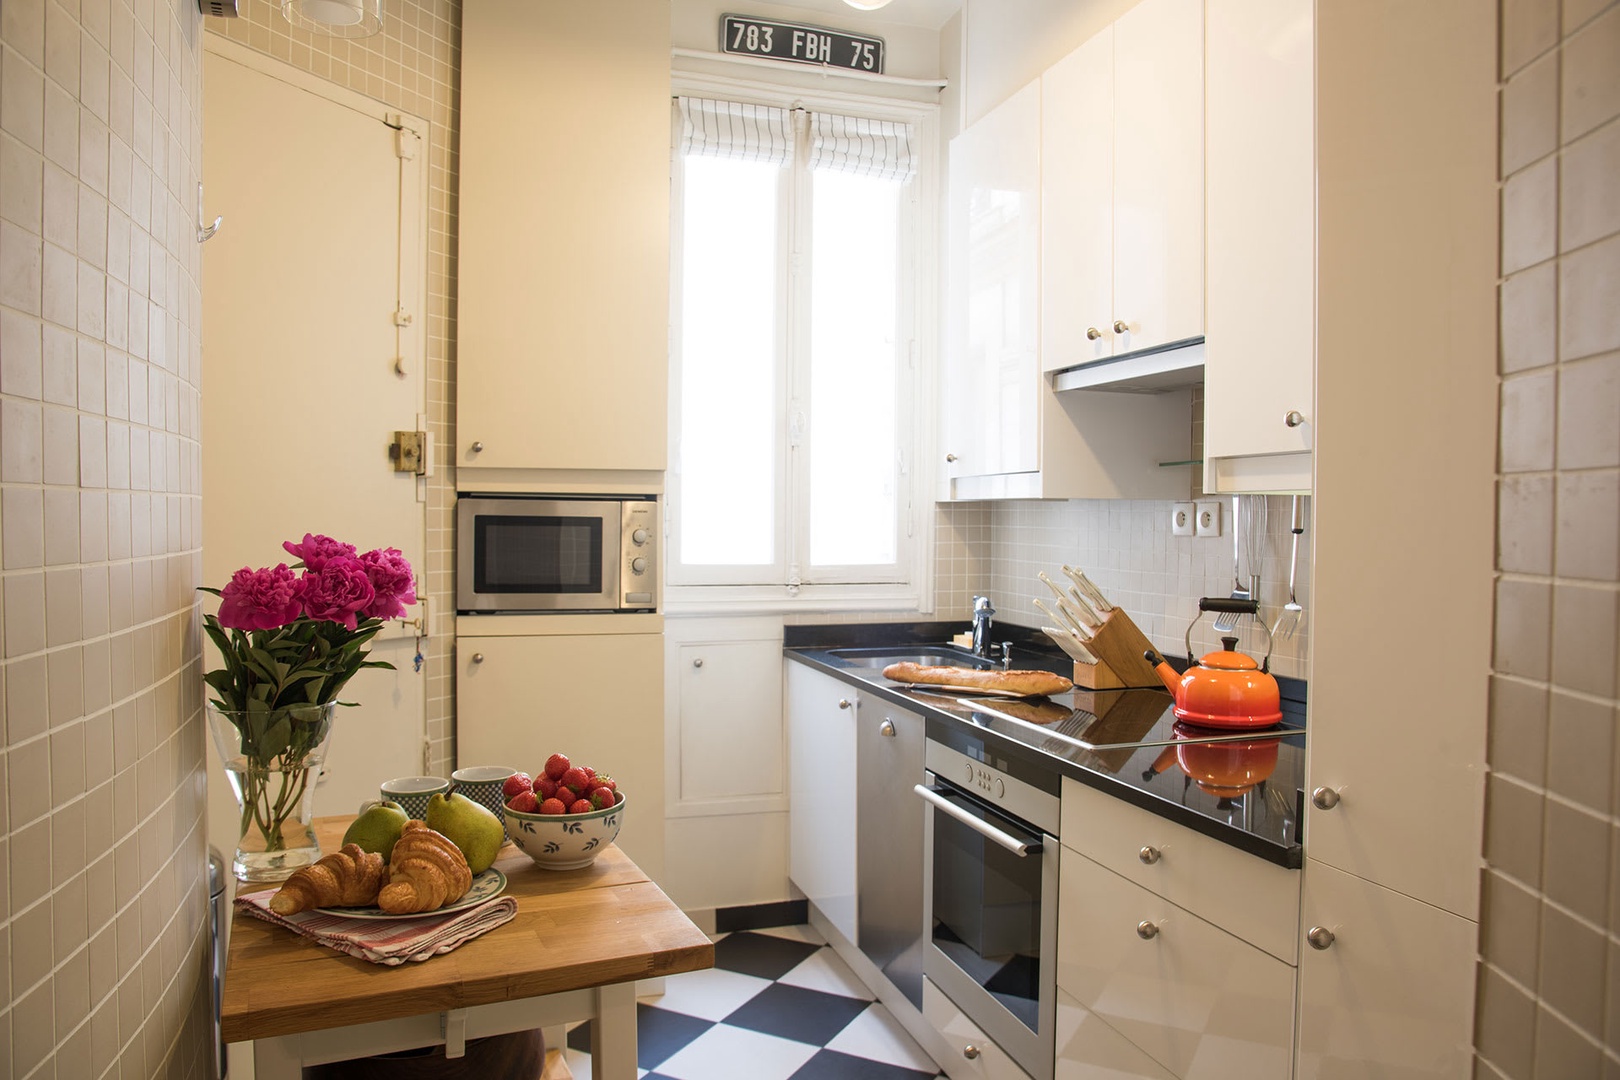 The fully equipped kitchen comes with modern appliances.